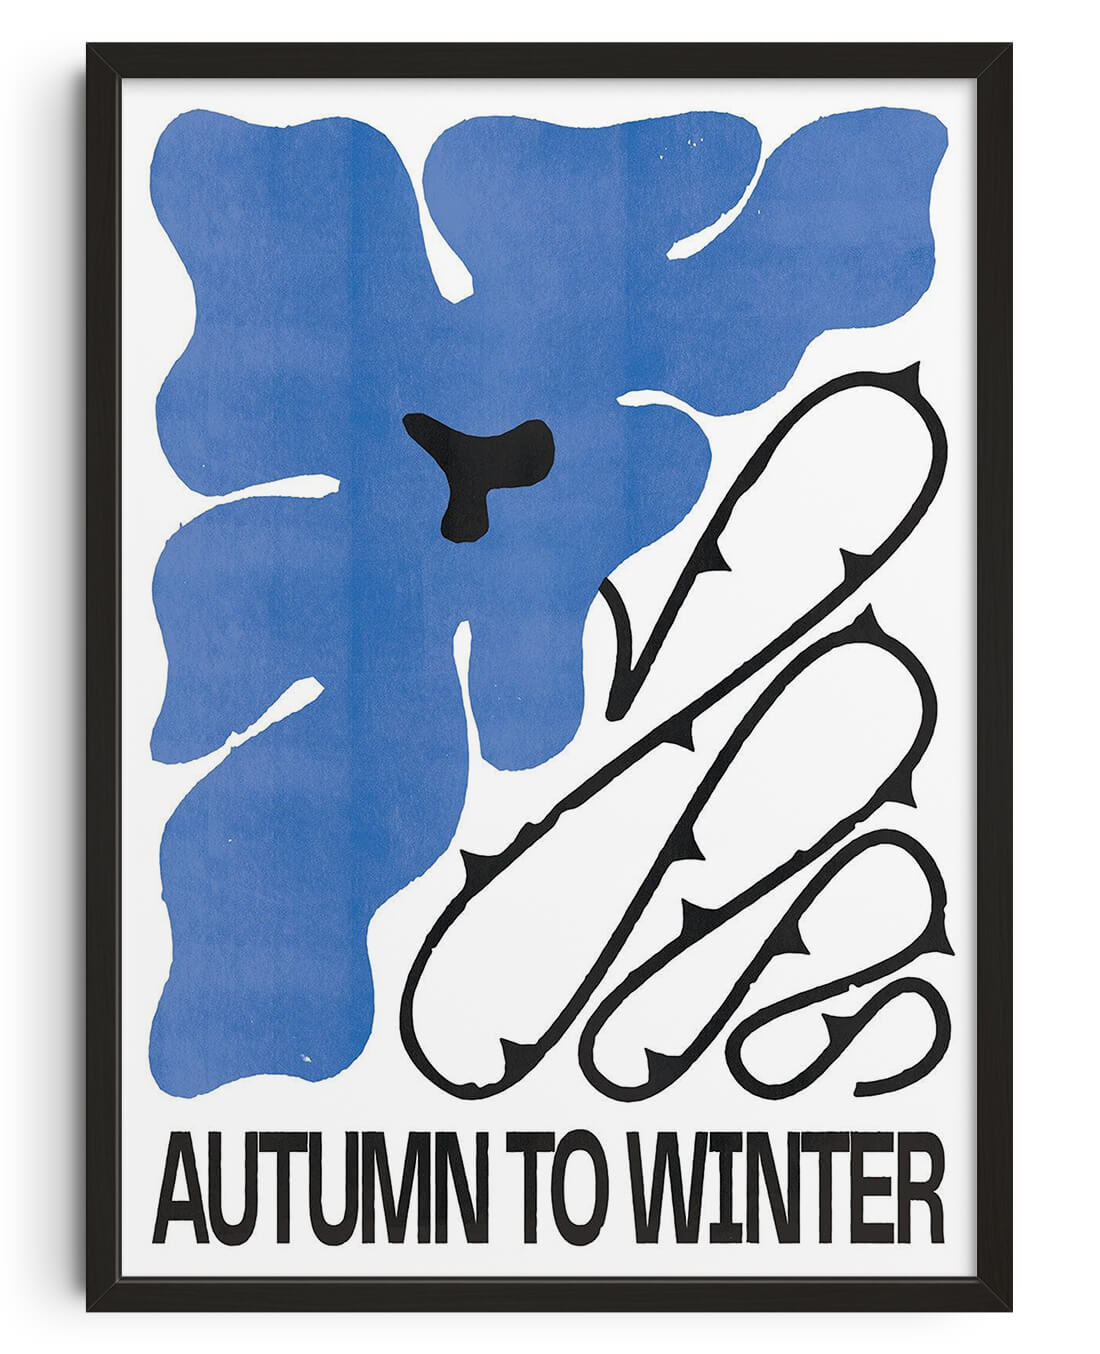 Autumn to Winter contemporary wall art print by Alexander Khabbazi - sold by DROOL